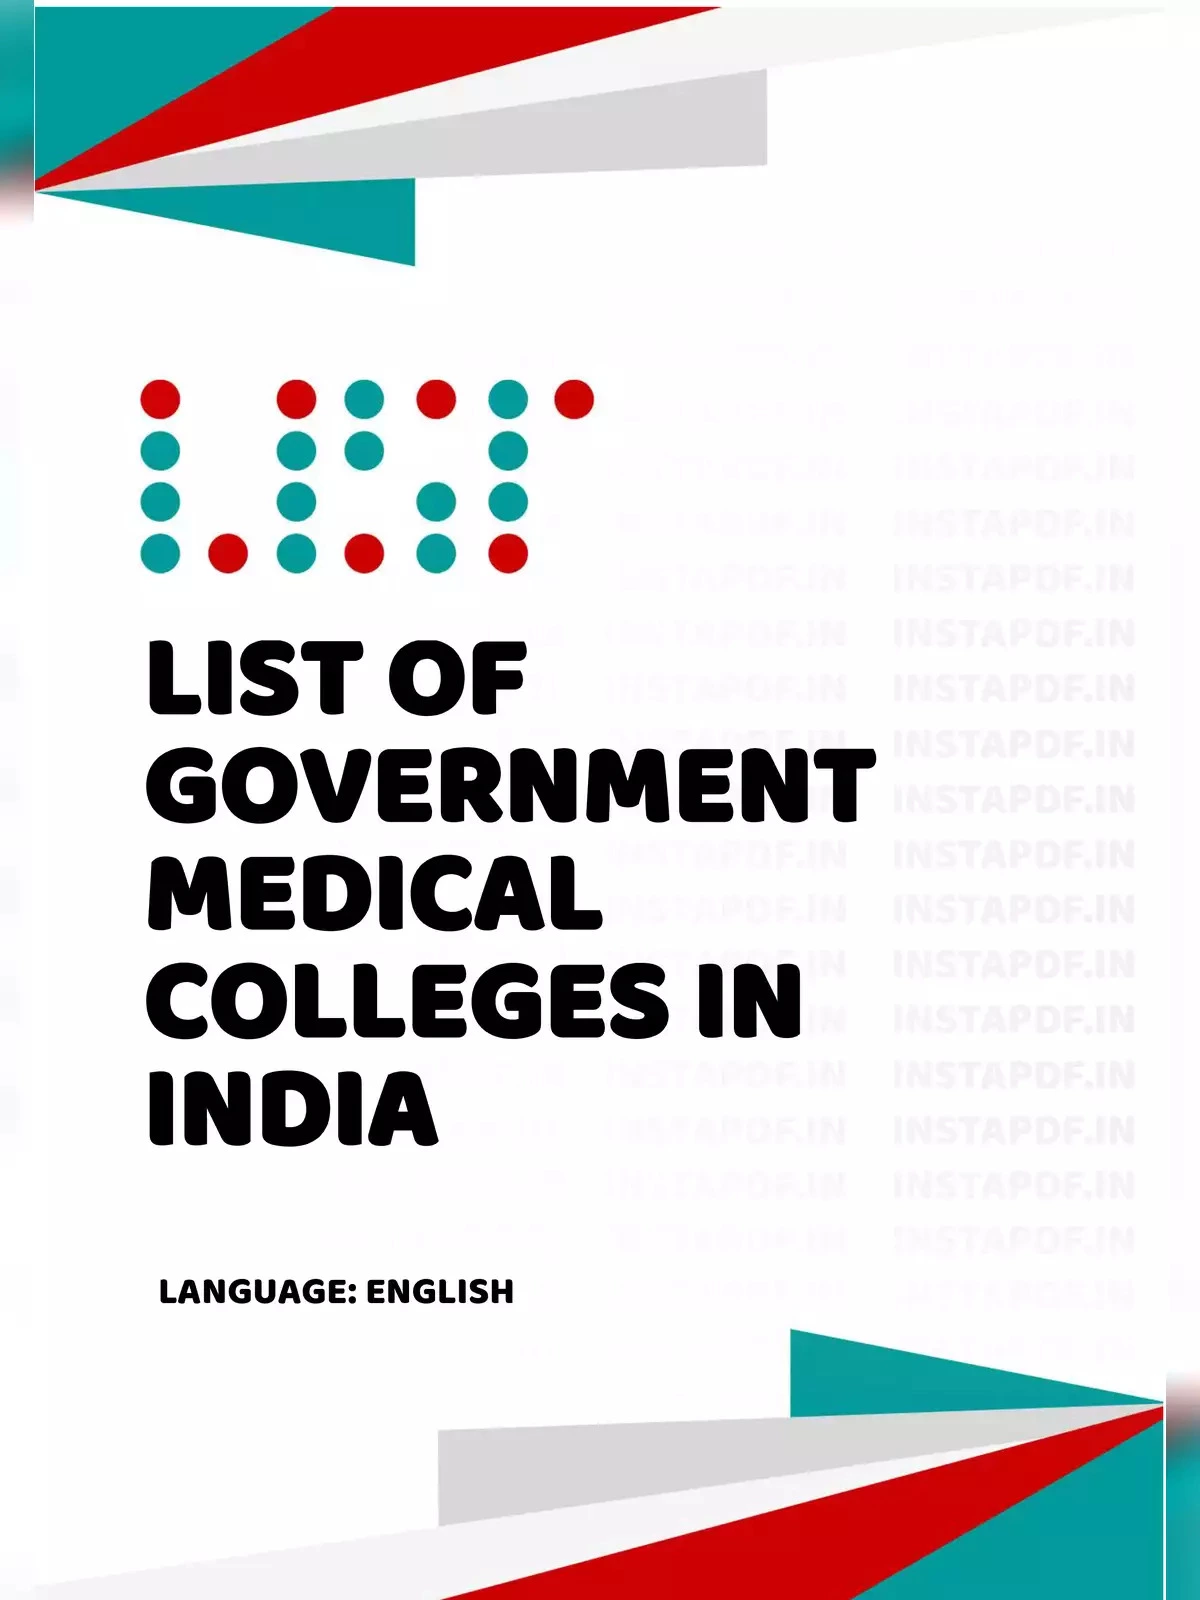 List of Government Medical Colleges in India